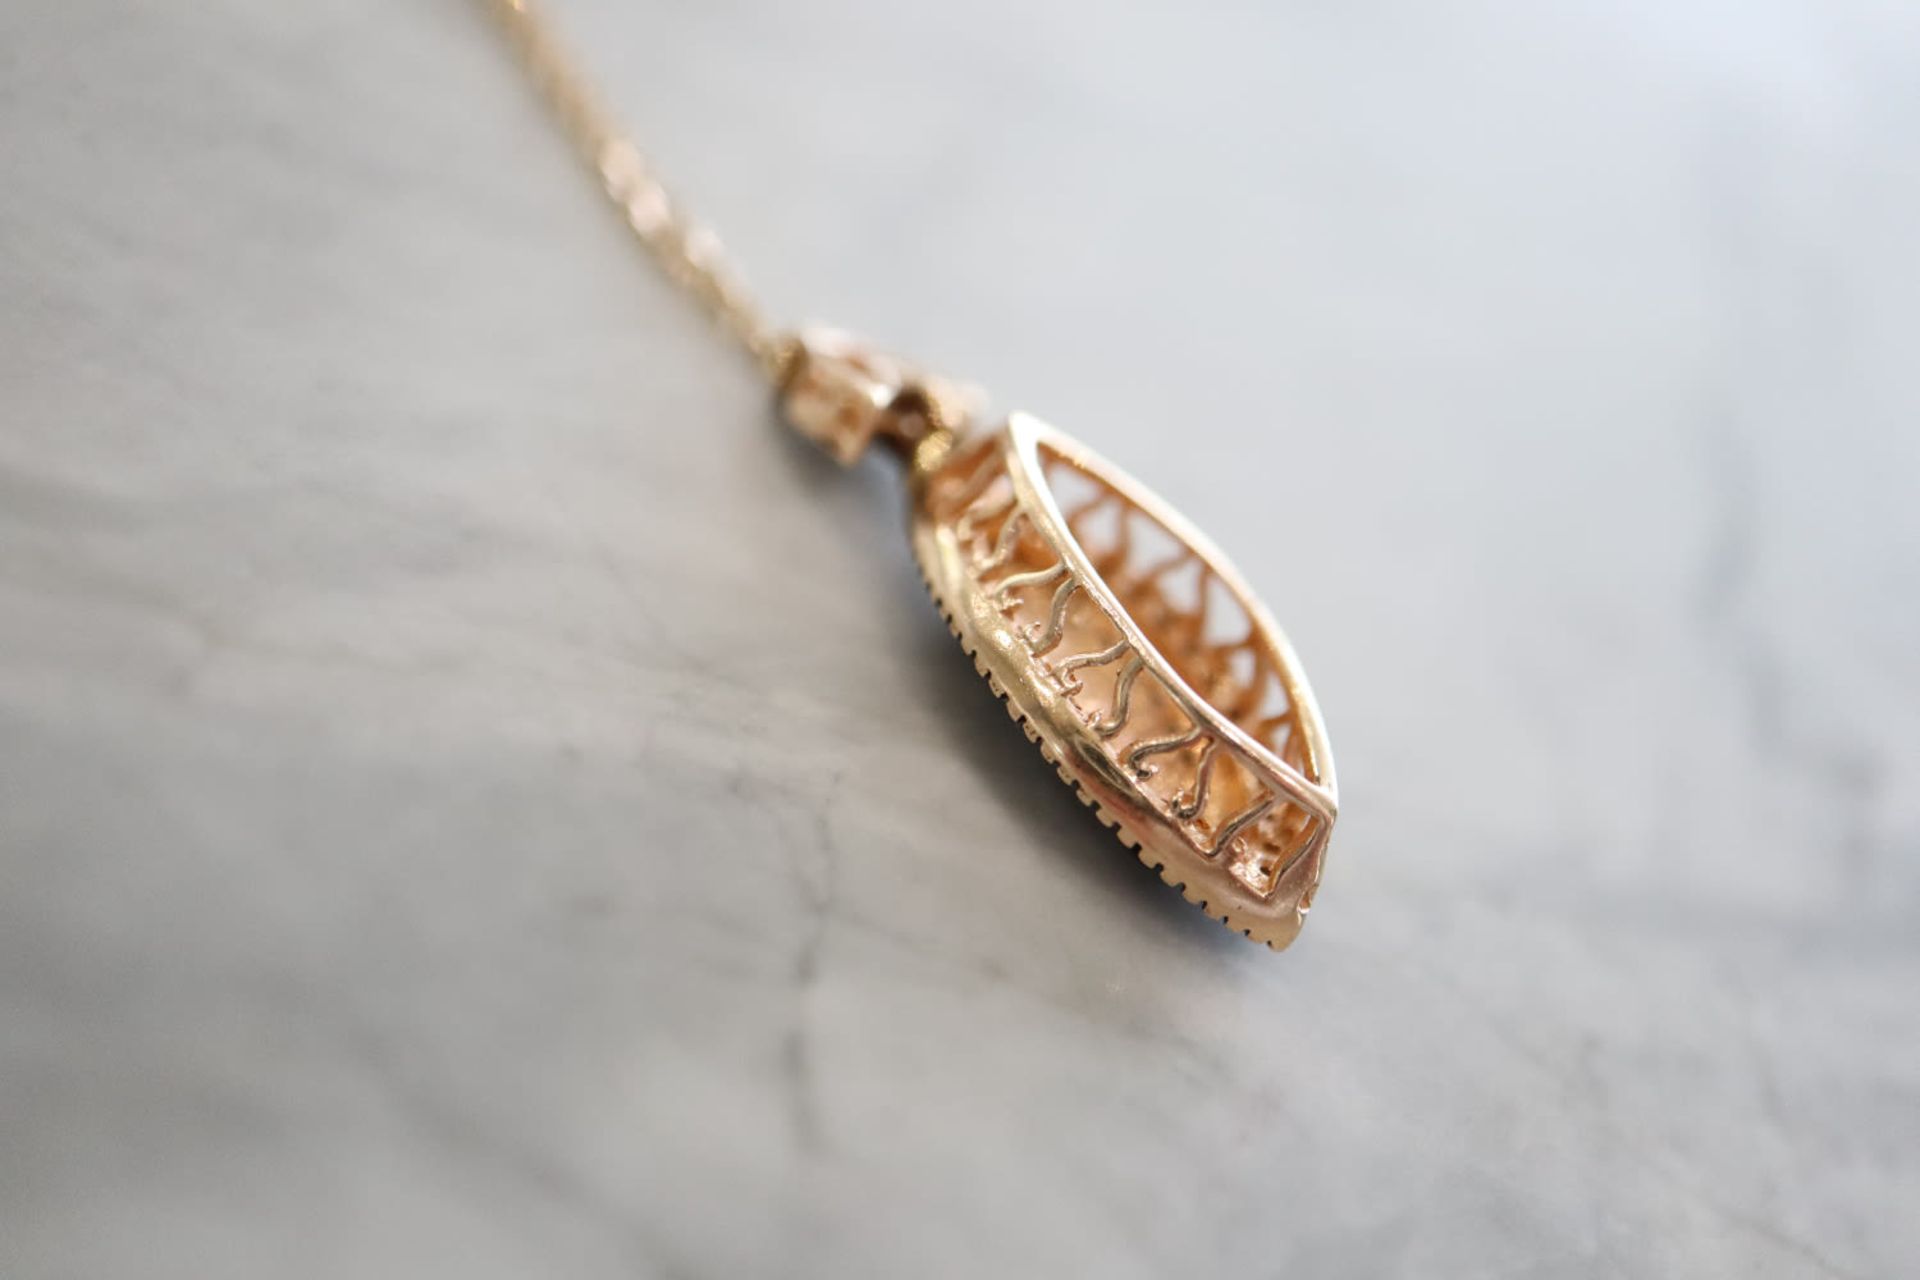 14K GOLD NECKLACE / PENDANT (3.9g) - Image 3 of 5